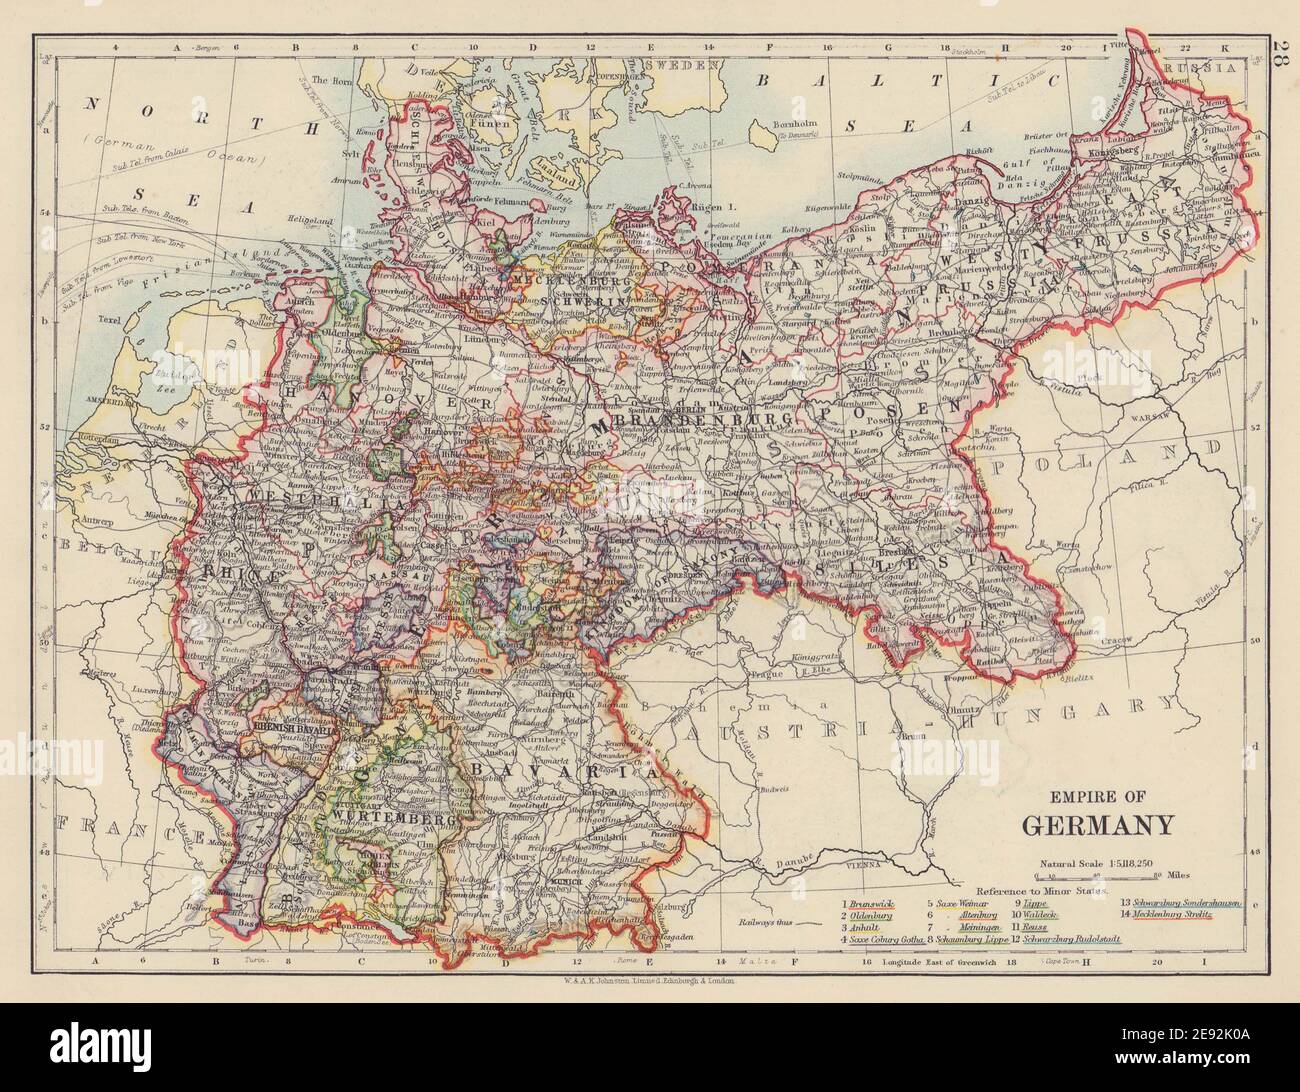 EMPIRE OF GERMANY. States. Prussia Bavaria Alsace Lorraine. JOHNSTON 1910 map Stock Photo